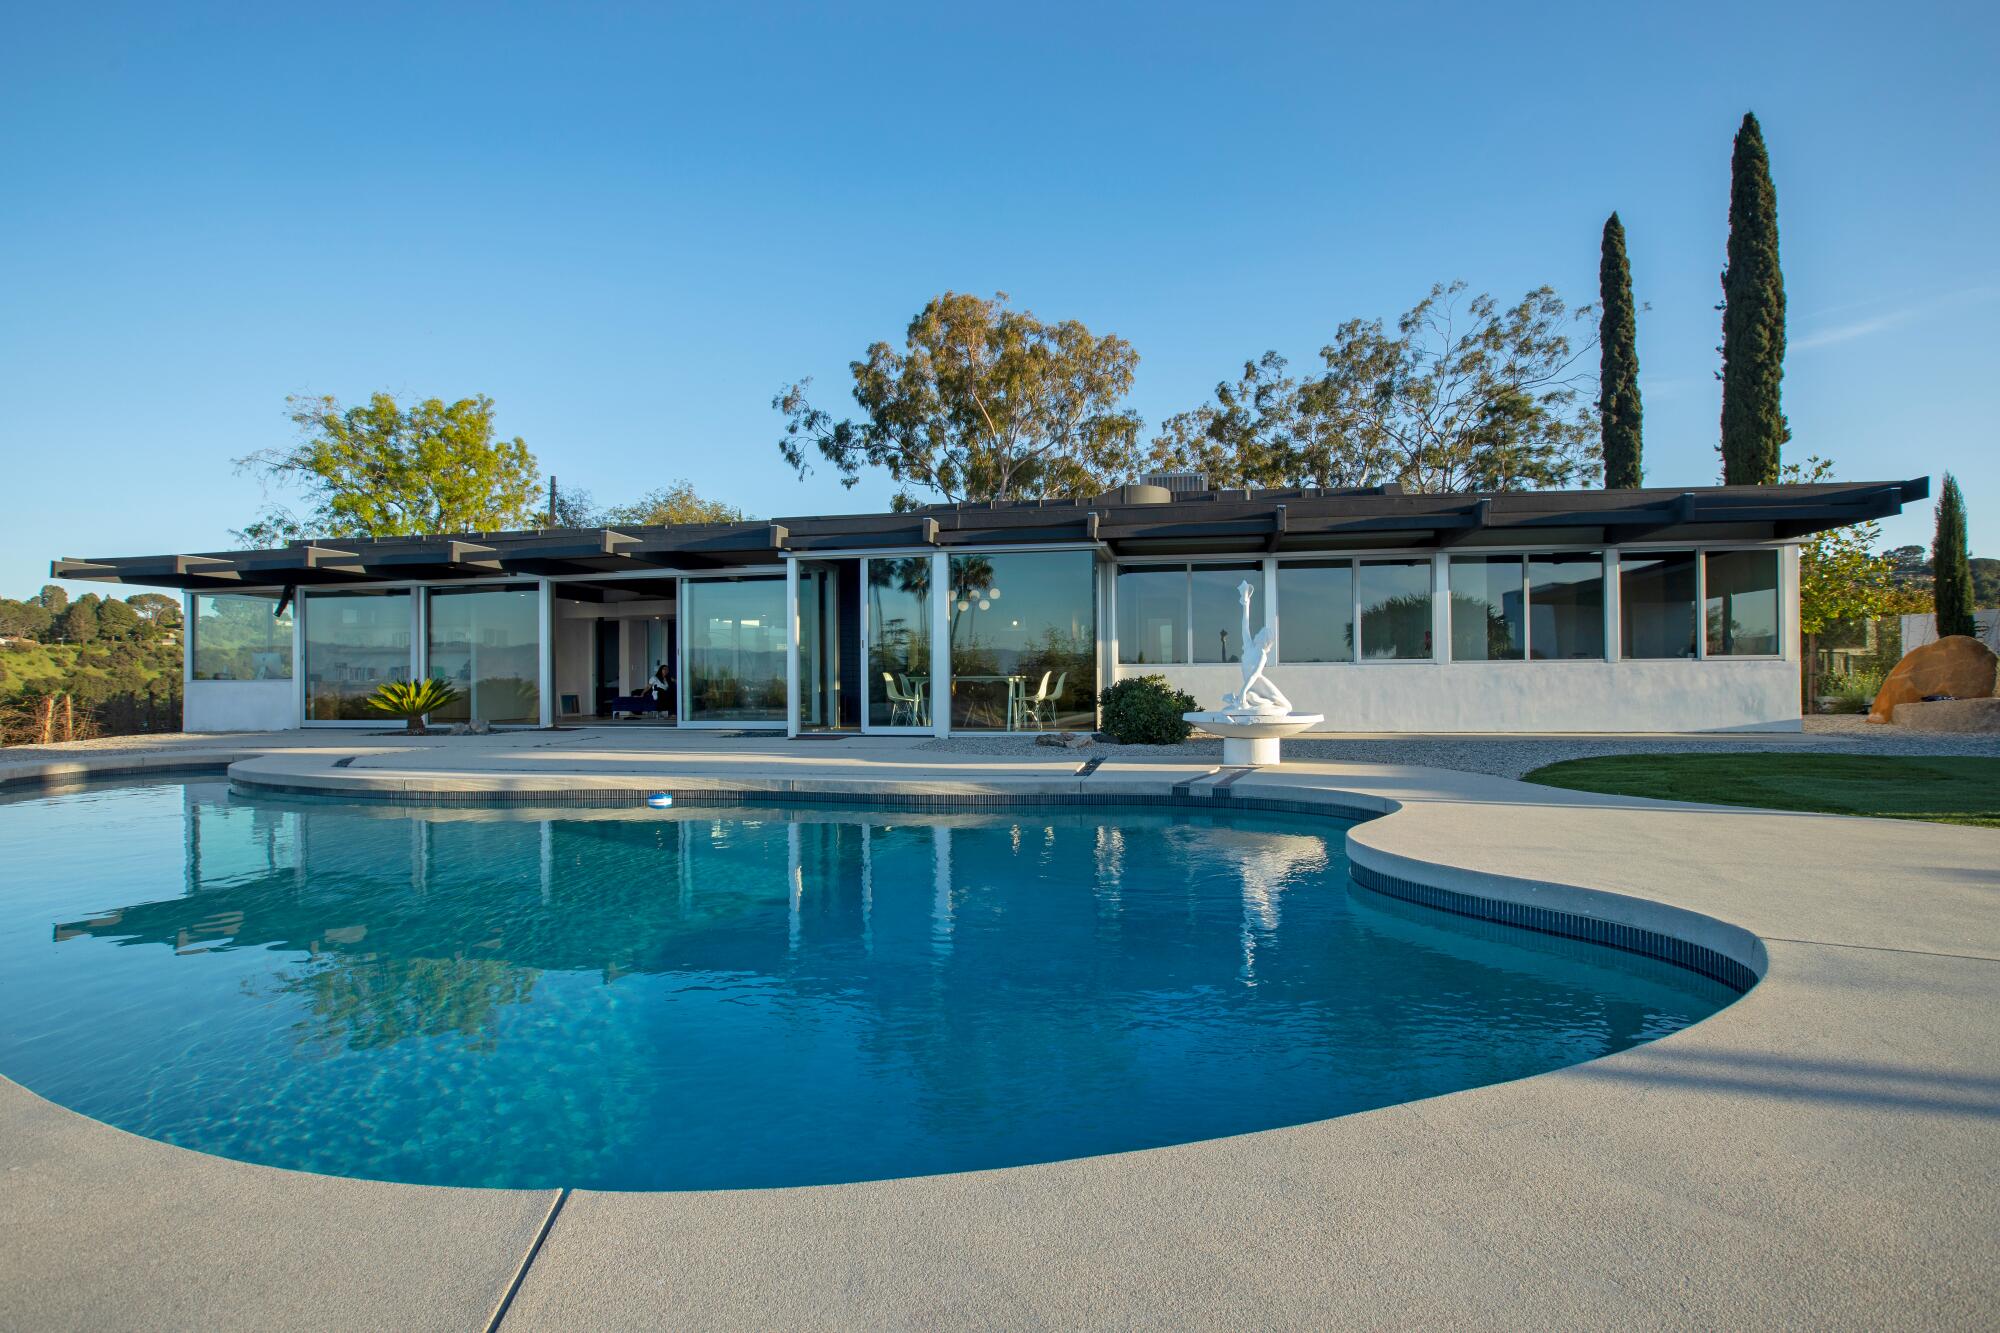 A swimming pool in the backyard of a Richard Neutra-designed home in Sherman Oaks.